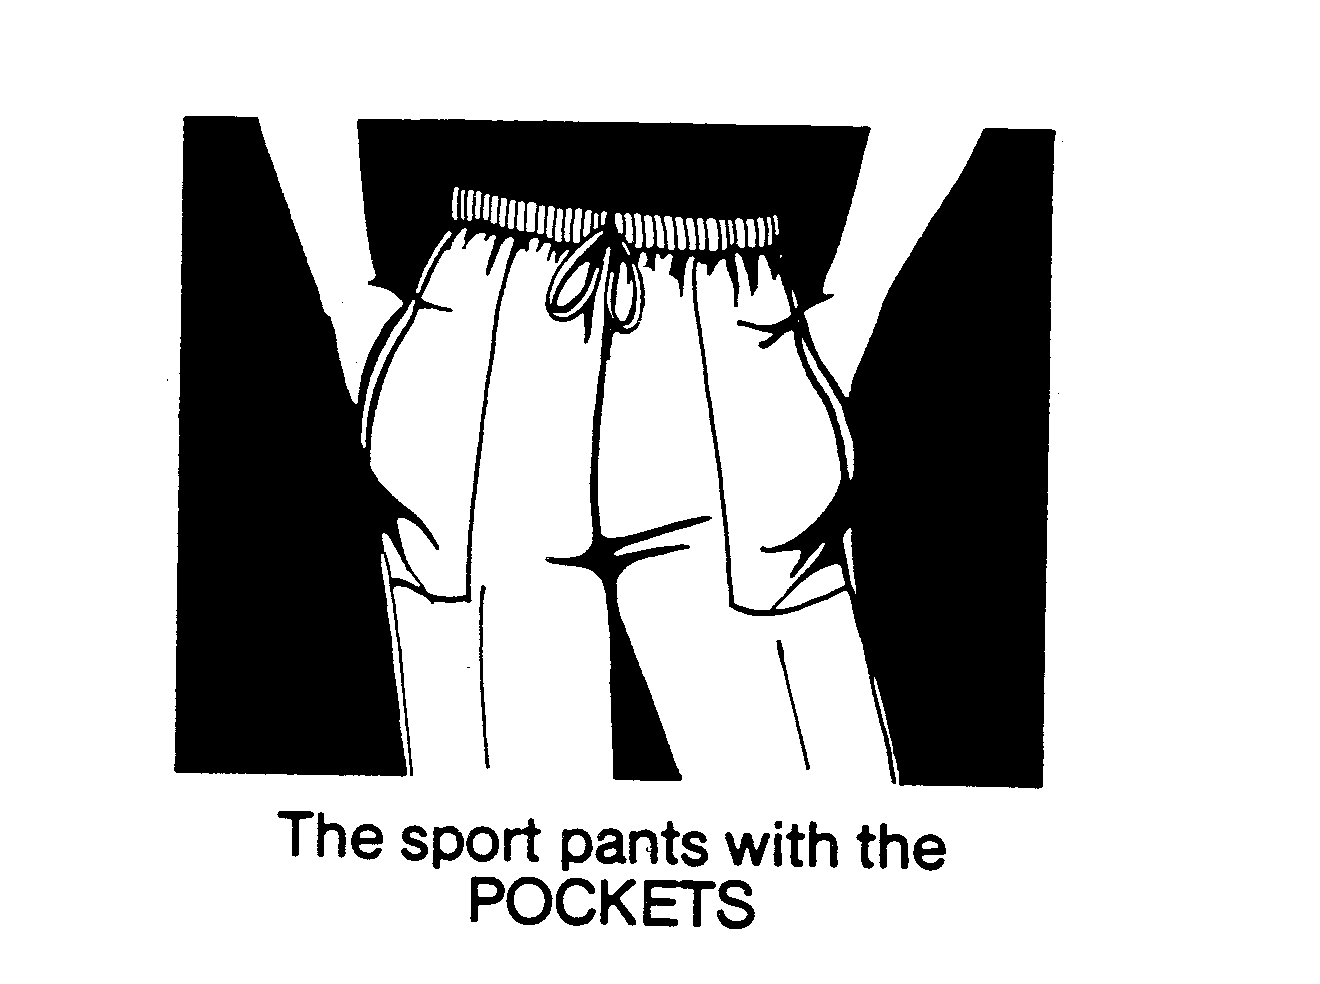  THE SPORT PANTS WITH THE POCKETS